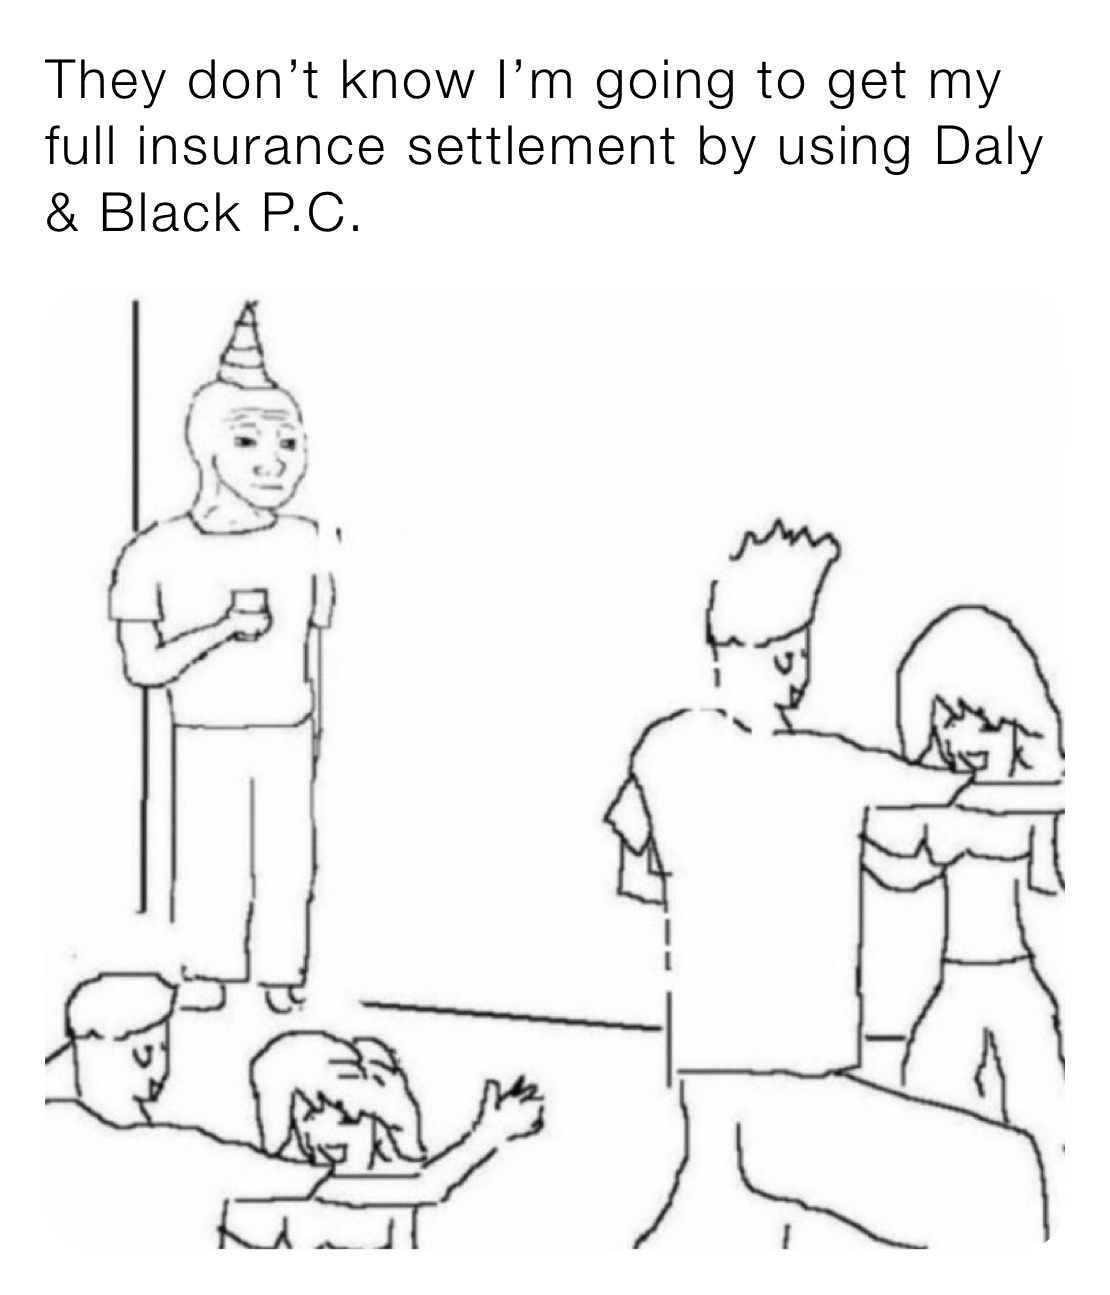 They don’t know I’m going to get my full insurance settlement by using Daly & Black P.C.